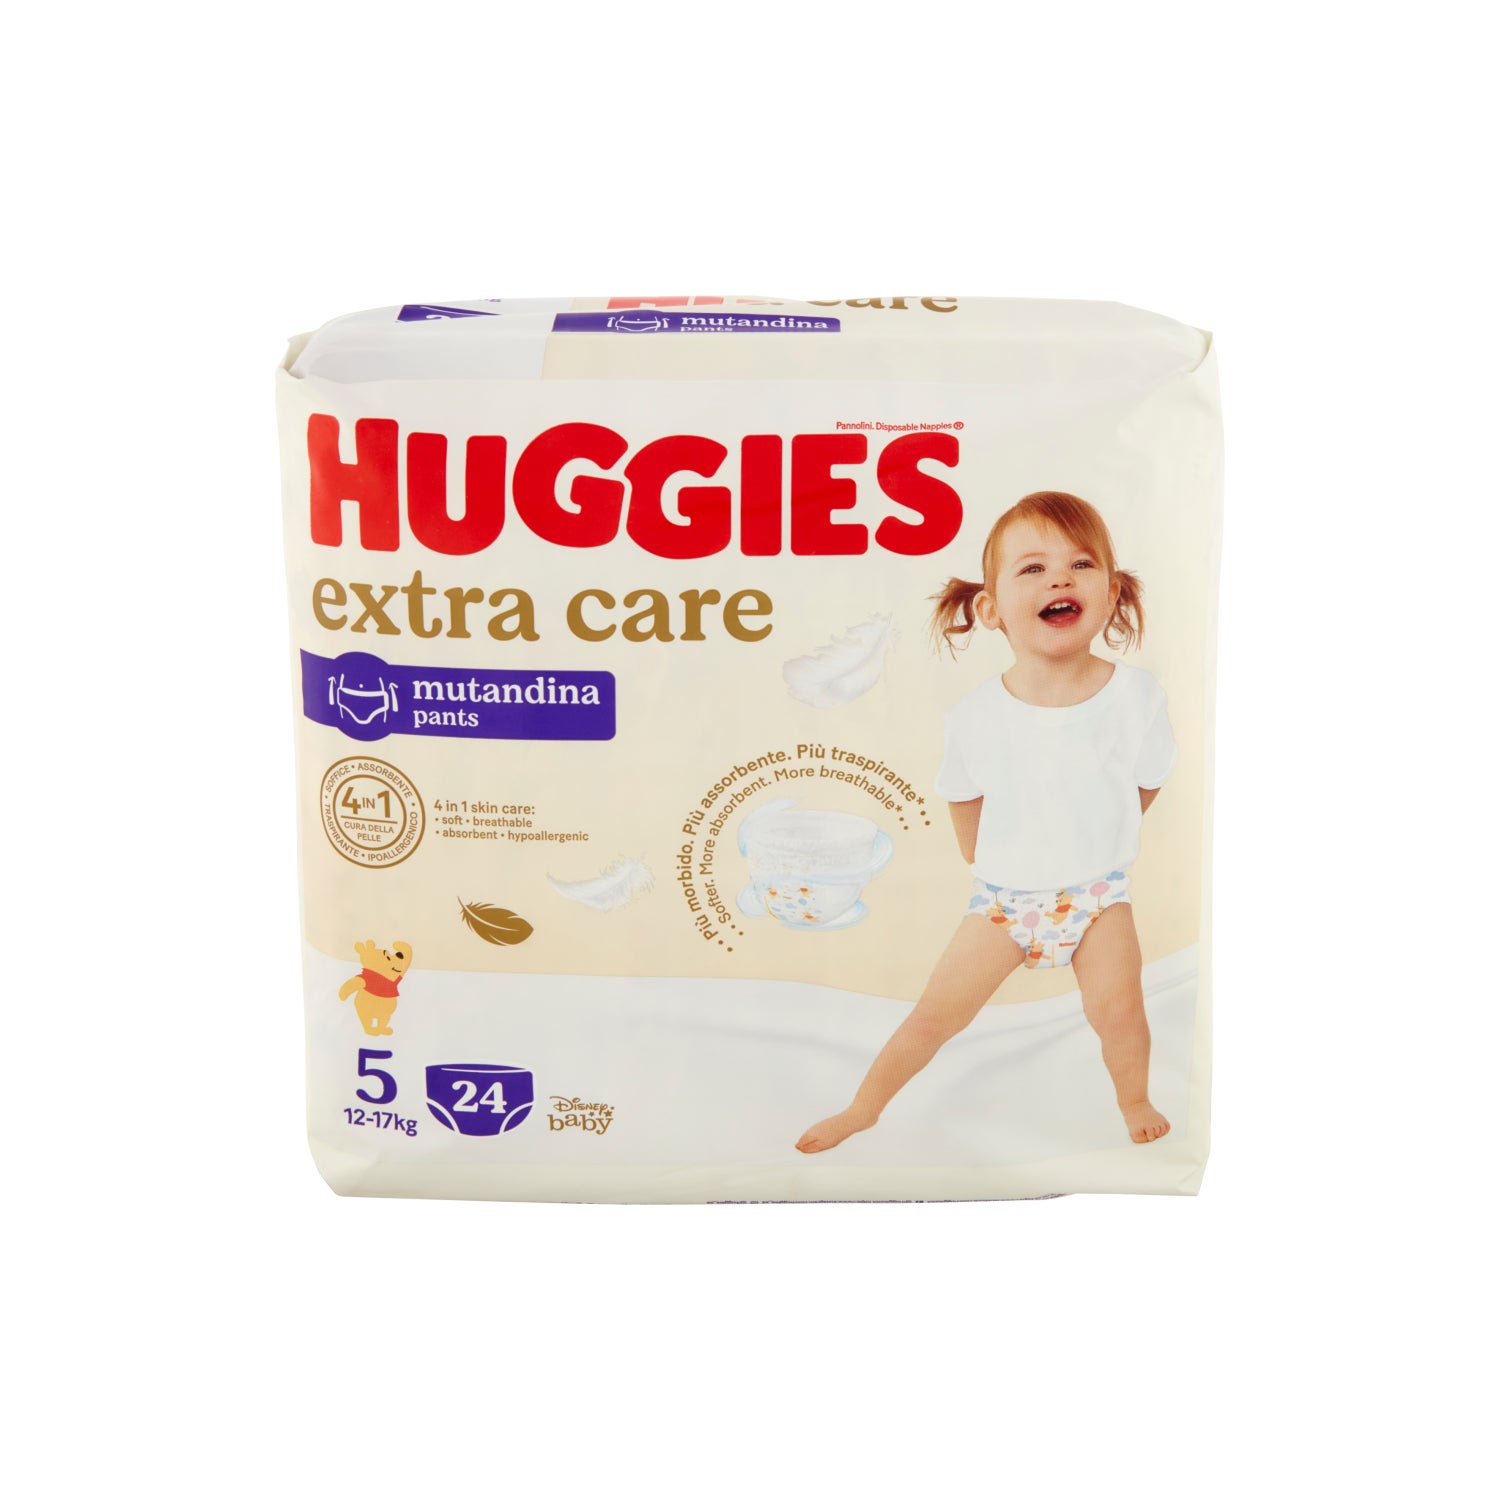 Huggies Extra Care Pants Disney Baby Taille 5 24uts